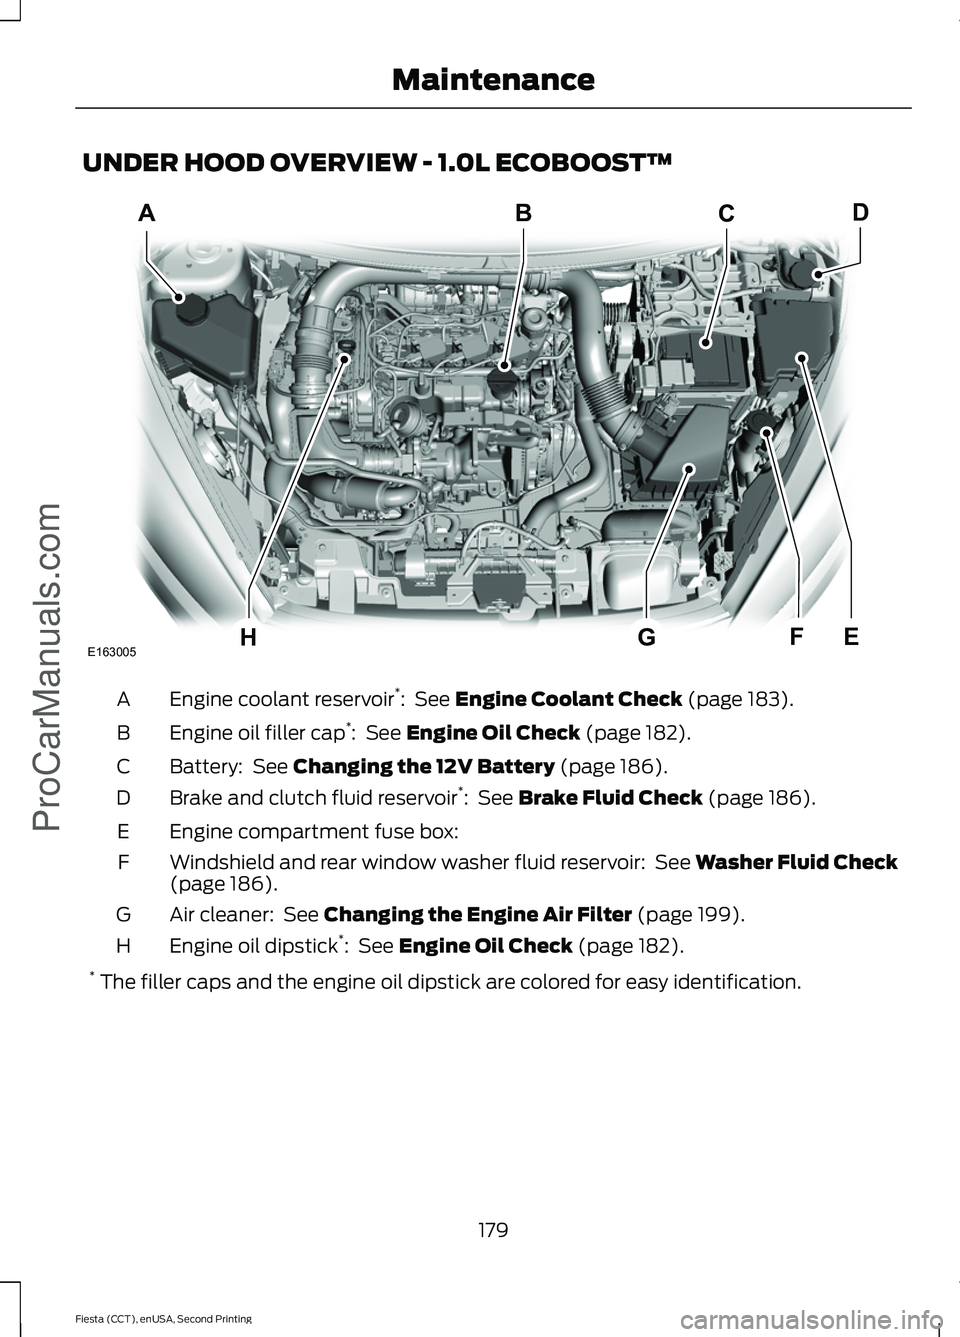 FORD FIESTA 2015  Owners Manual UNDER HOOD OVERVIEW - 1.0L ECOBOOST™
Engine coolant reservoir
*
:  See Engine Coolant Check (page 183).
A
Engine oil filler cap *
: 
 See Engine Oil Check (page 182).
B
Battery: 
 See Changing the 1